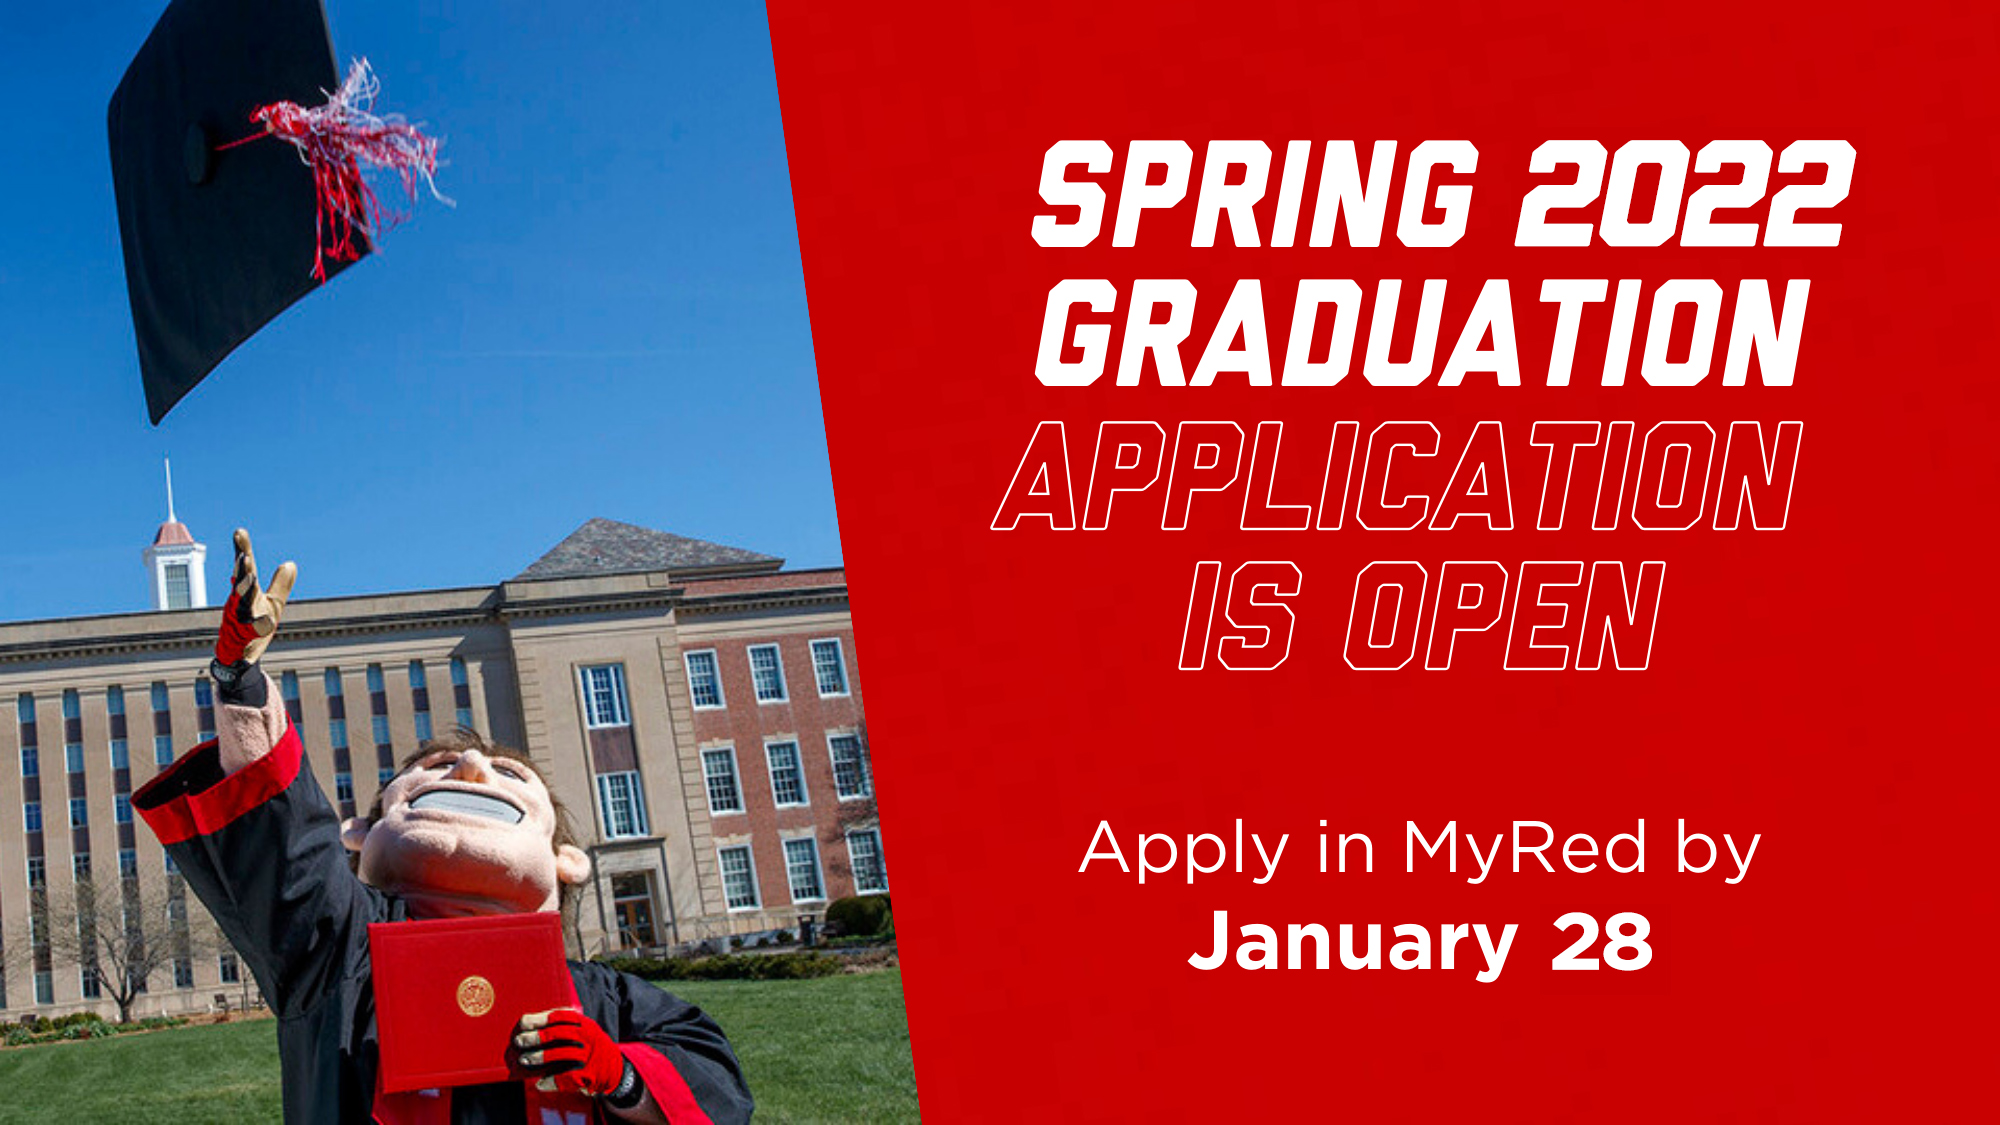 Spring 2022 graduation applications are now available to students in MyRED. The graduation application deadline is January 28.